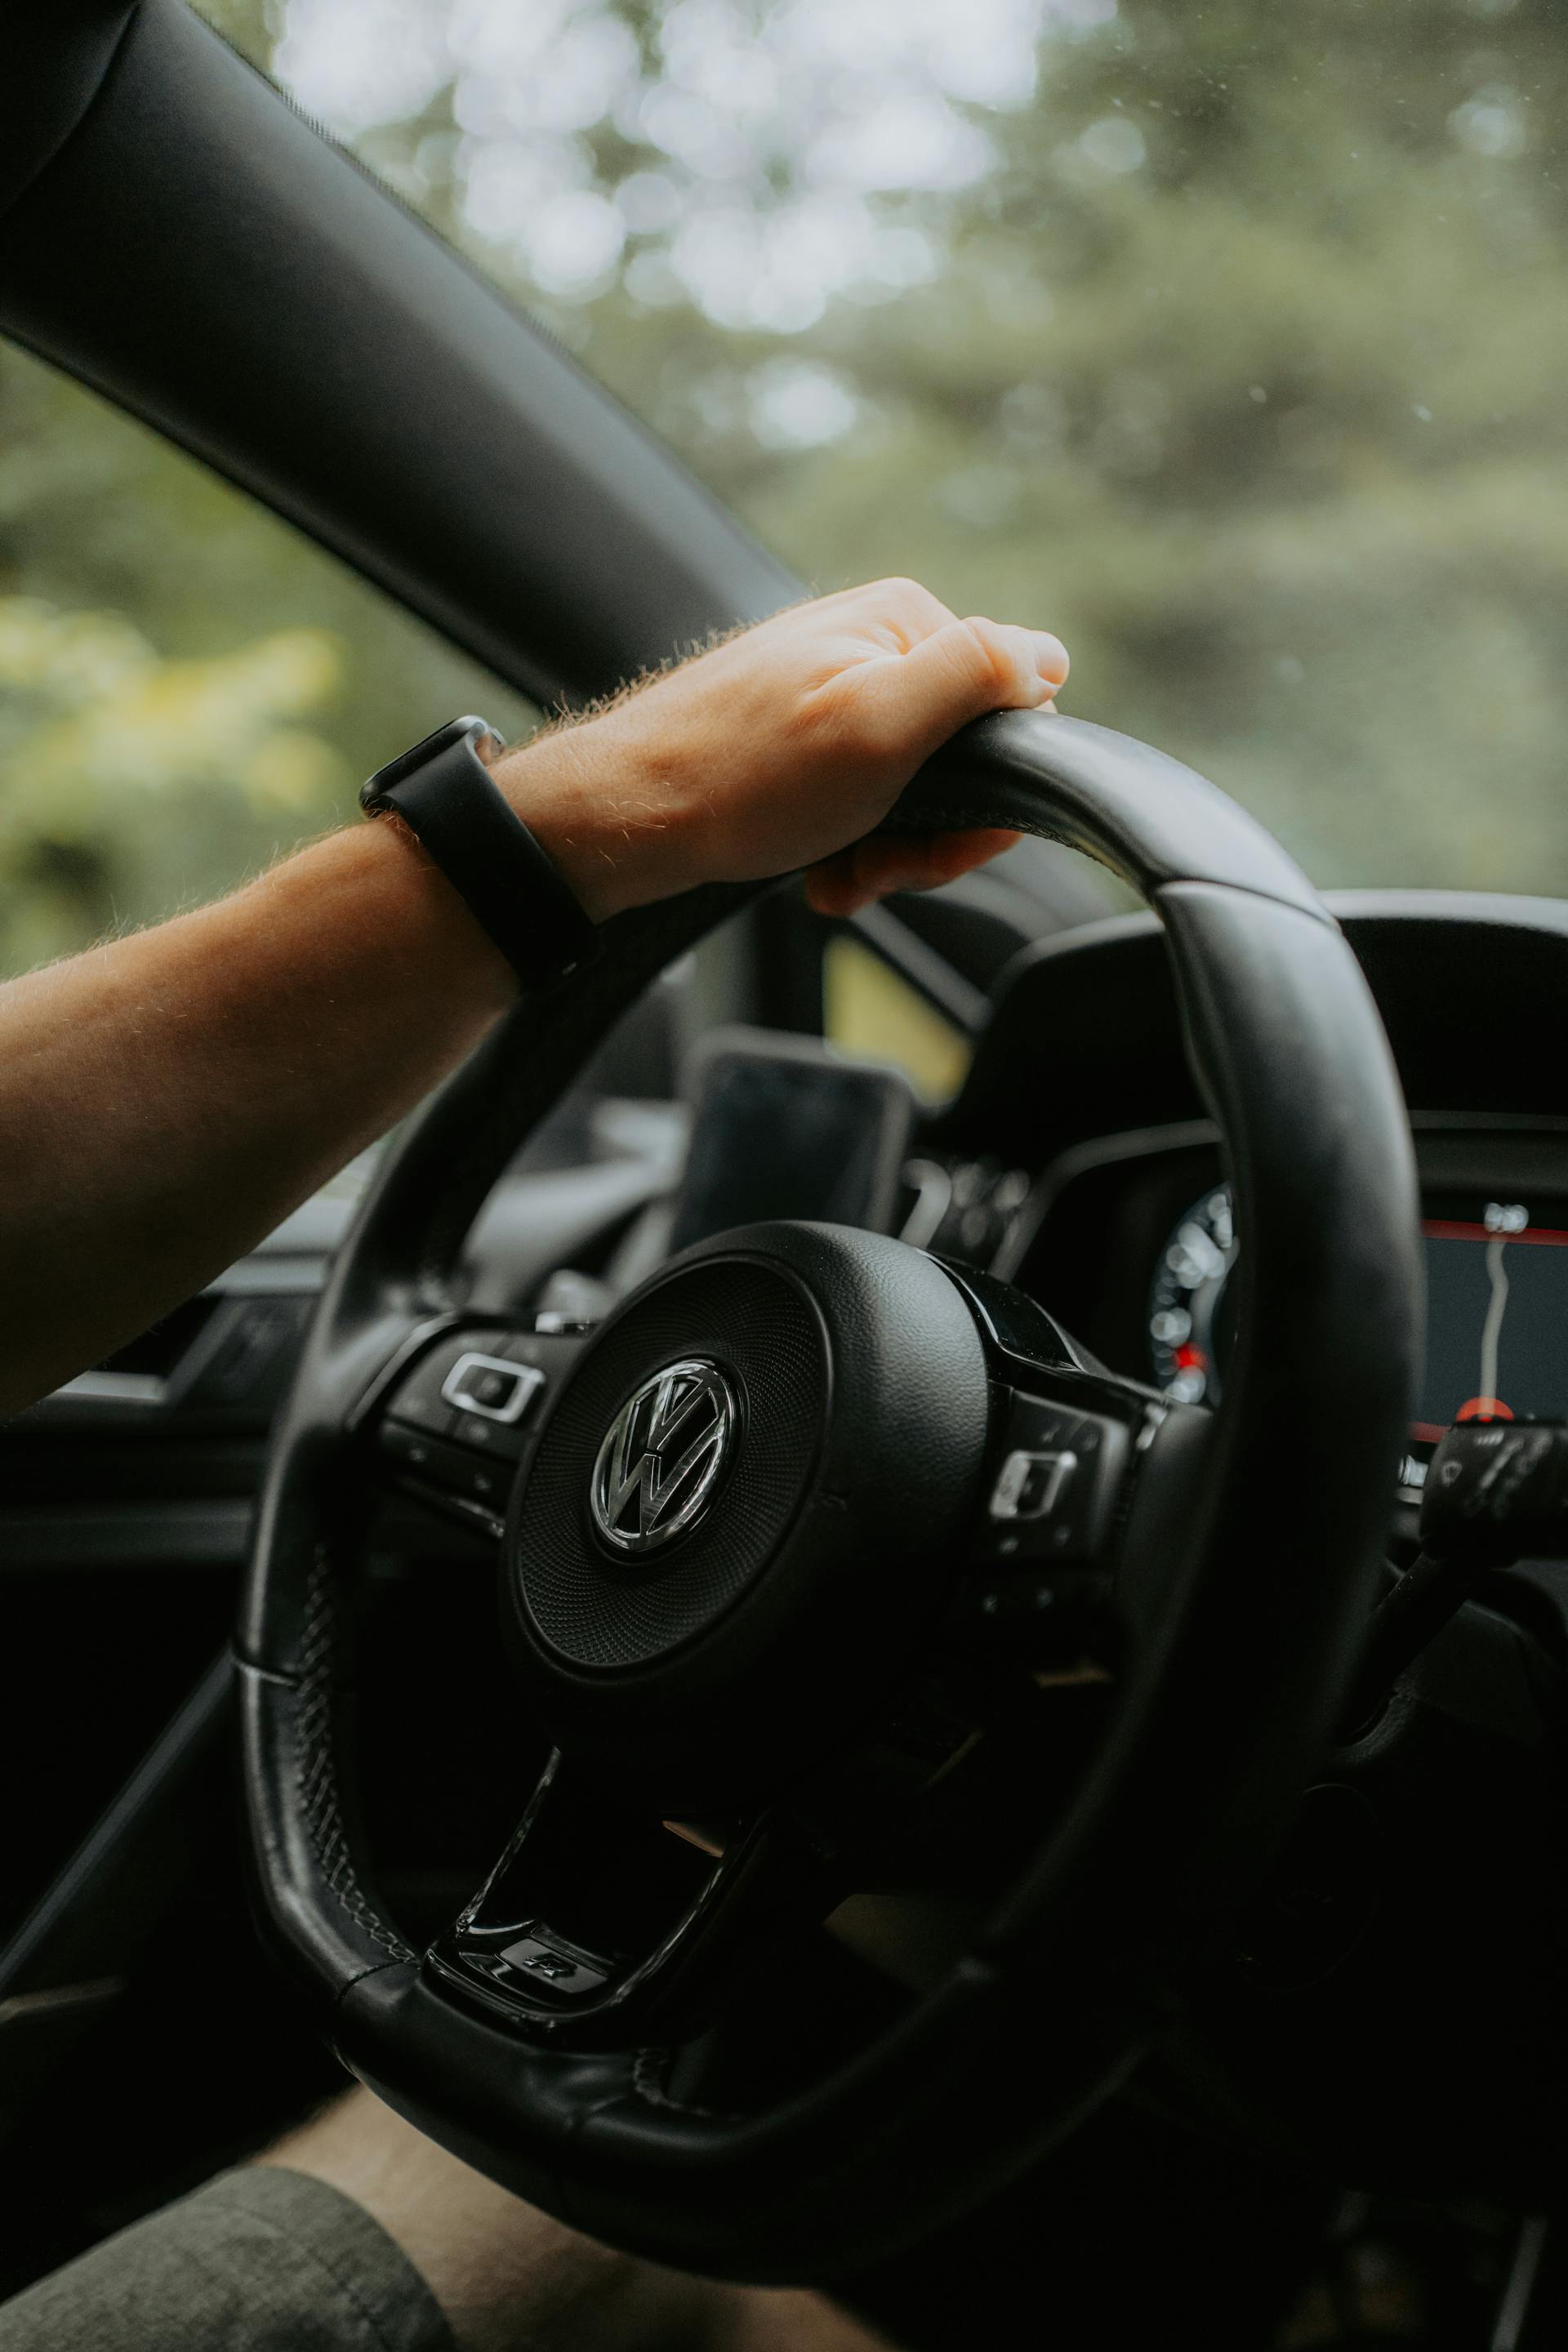 A man holding the steering wheel of a Volkswagen car with one hand | Source: Pexels